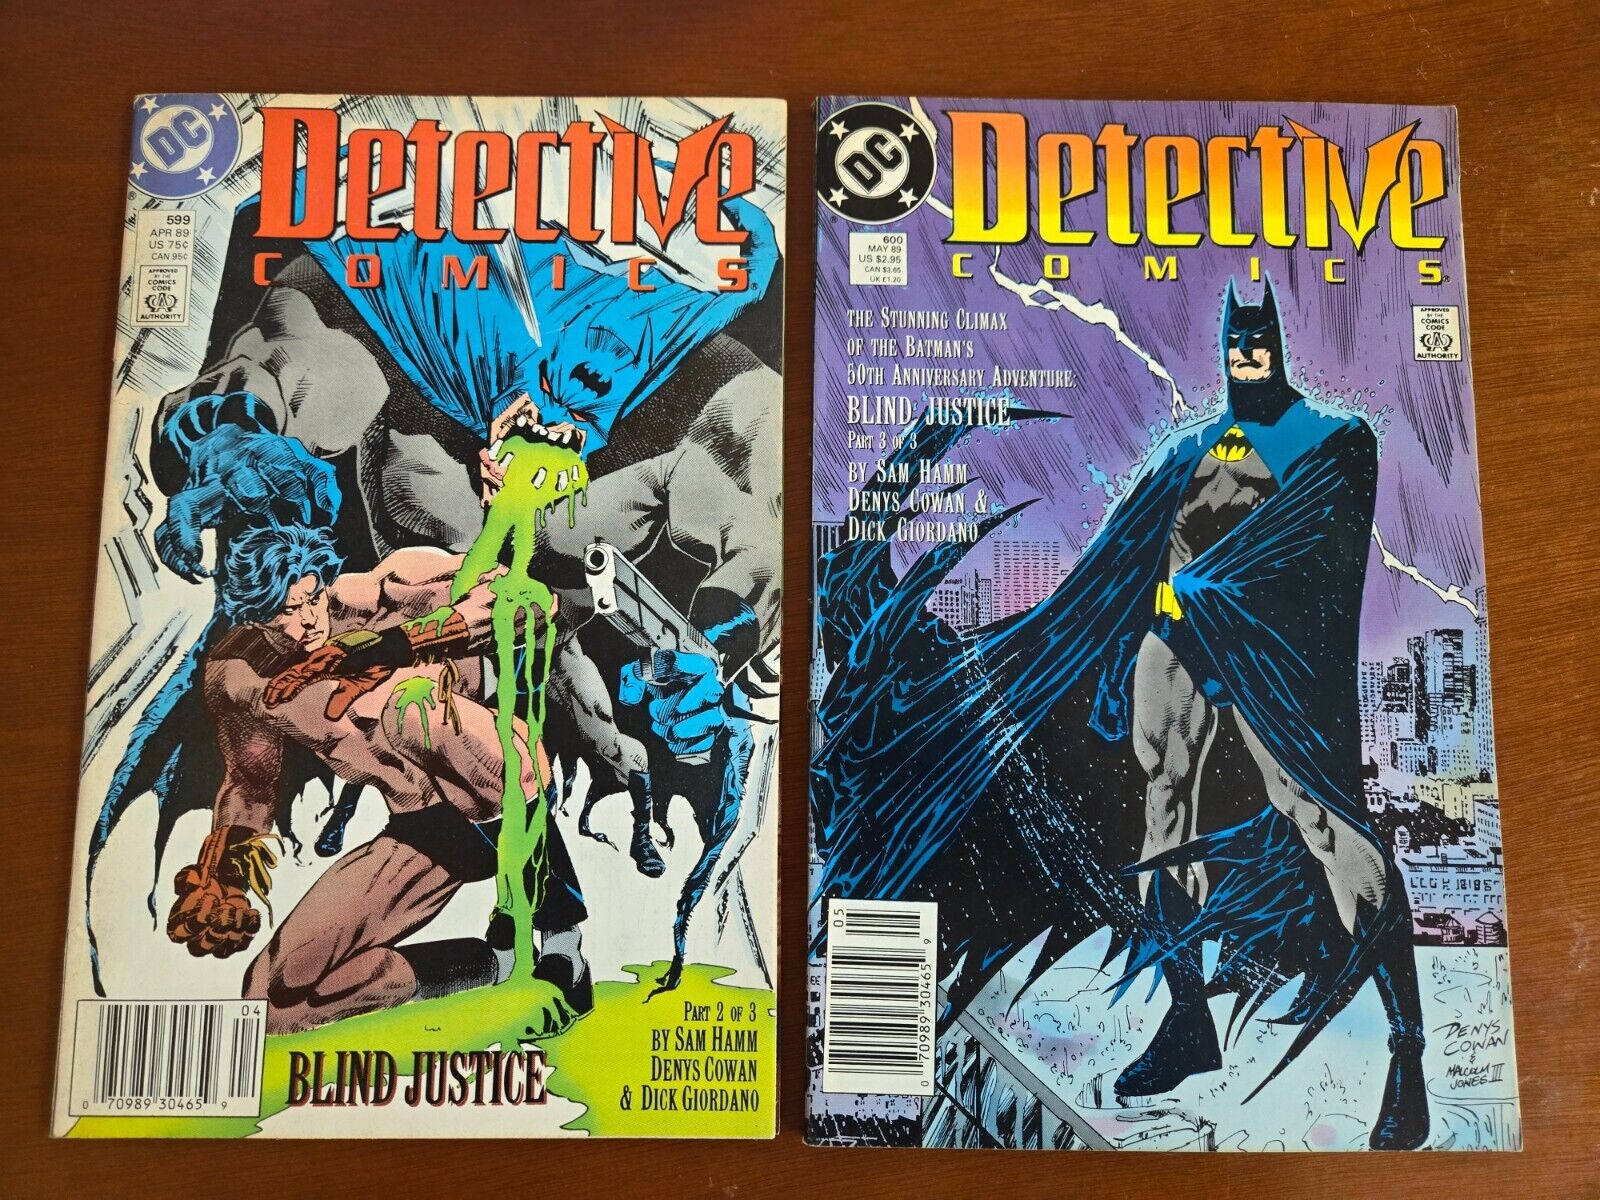 DC Detective Comics #599 600 Blind Justice Parts 2-3 NEAR COMPLETE - 1989 -FN/VF